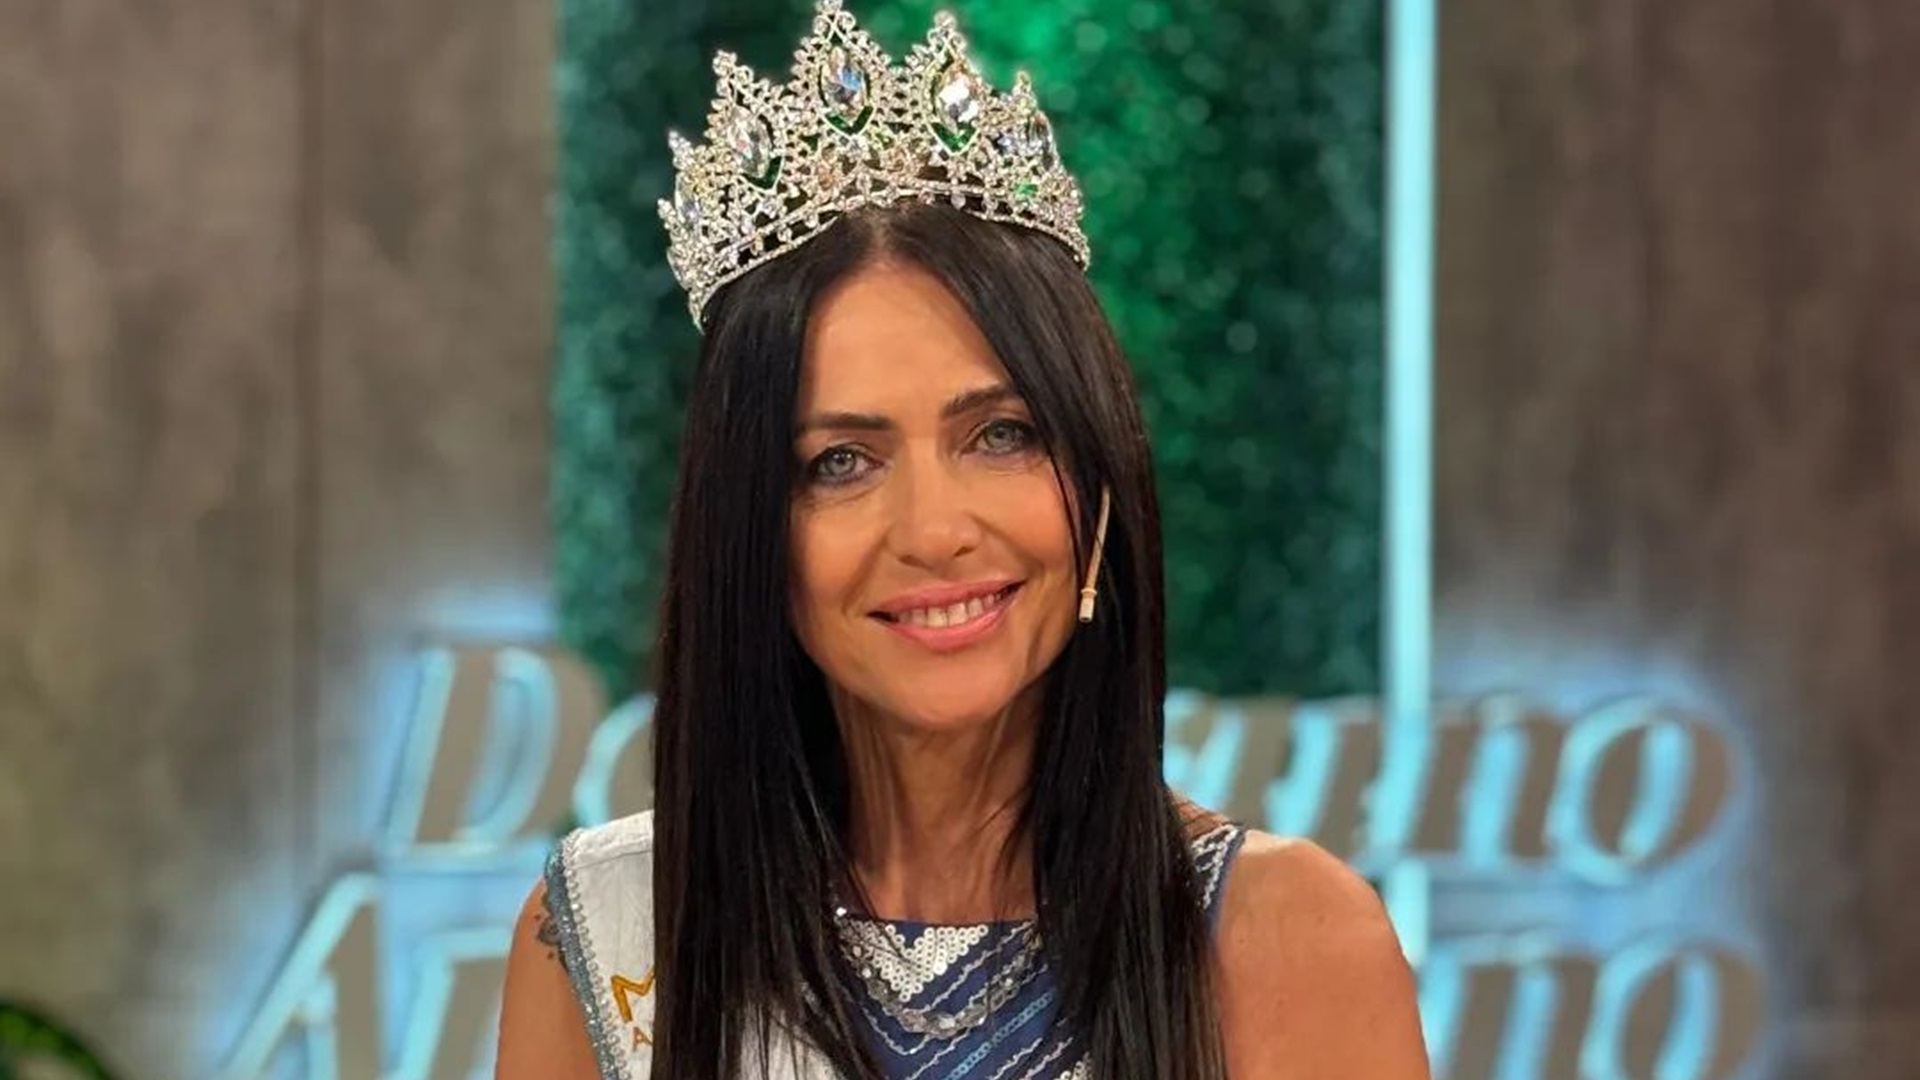 Alejandra Rodriguez, the 60-year-old winner of Miss Universe Buenos Aires